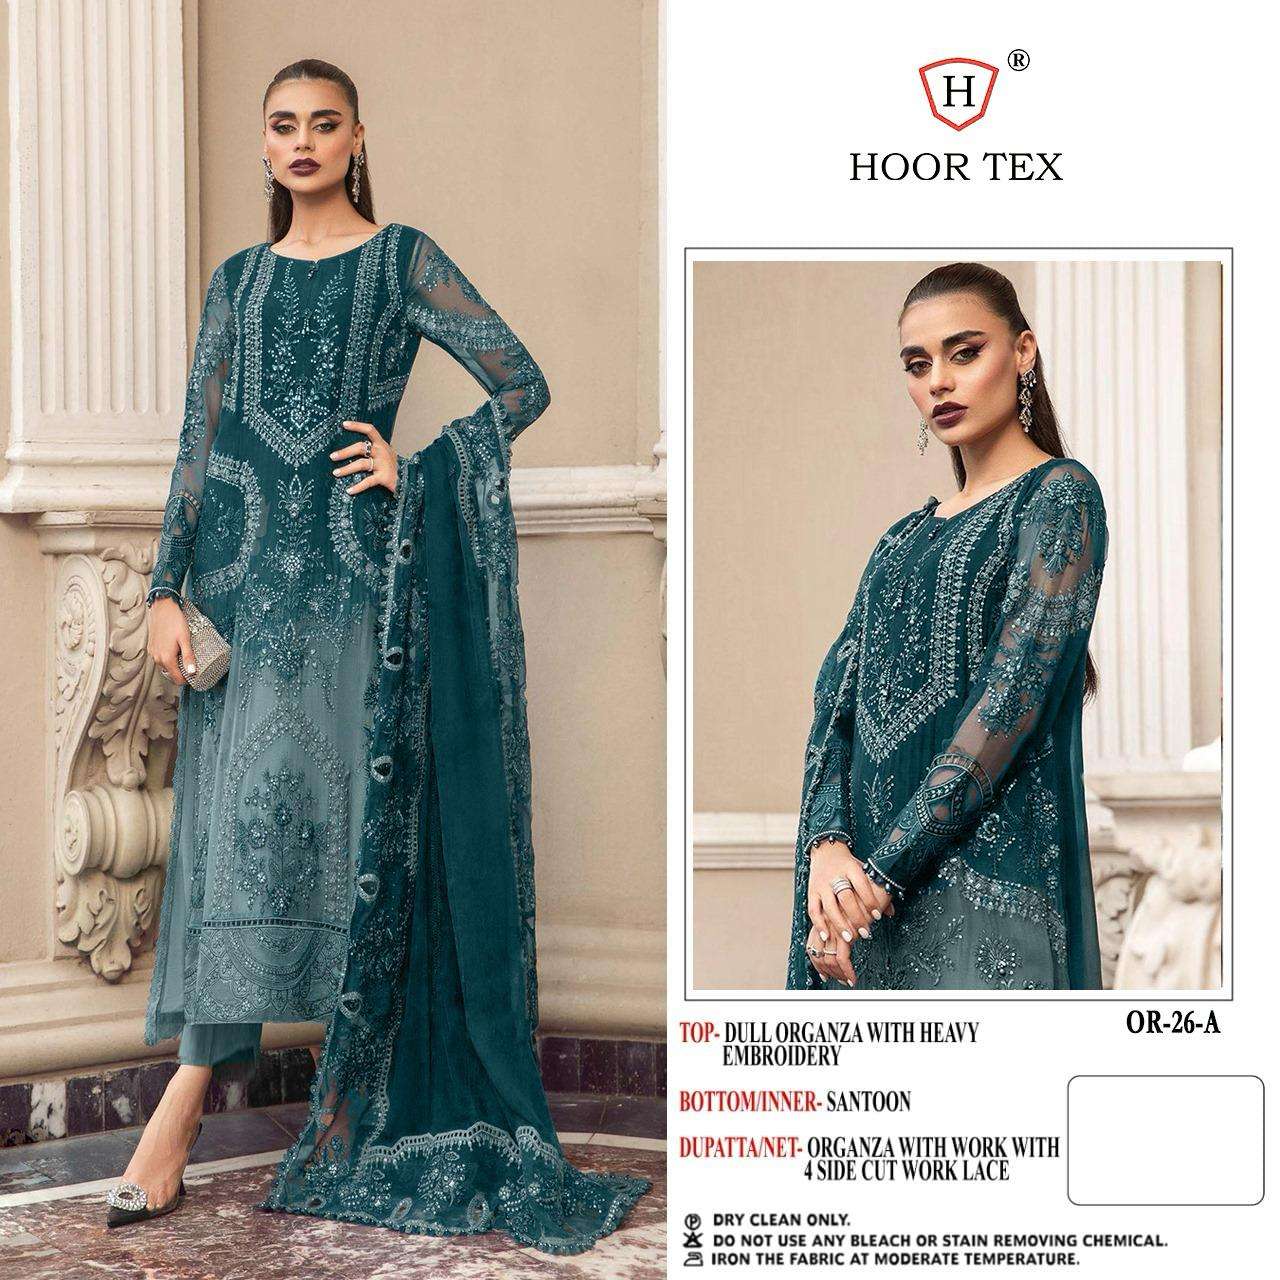 OR-26 COLOURS BY HOOR TEX DESIGNER ORGANZA EMBROIDERED PAKISTANI DRESSES